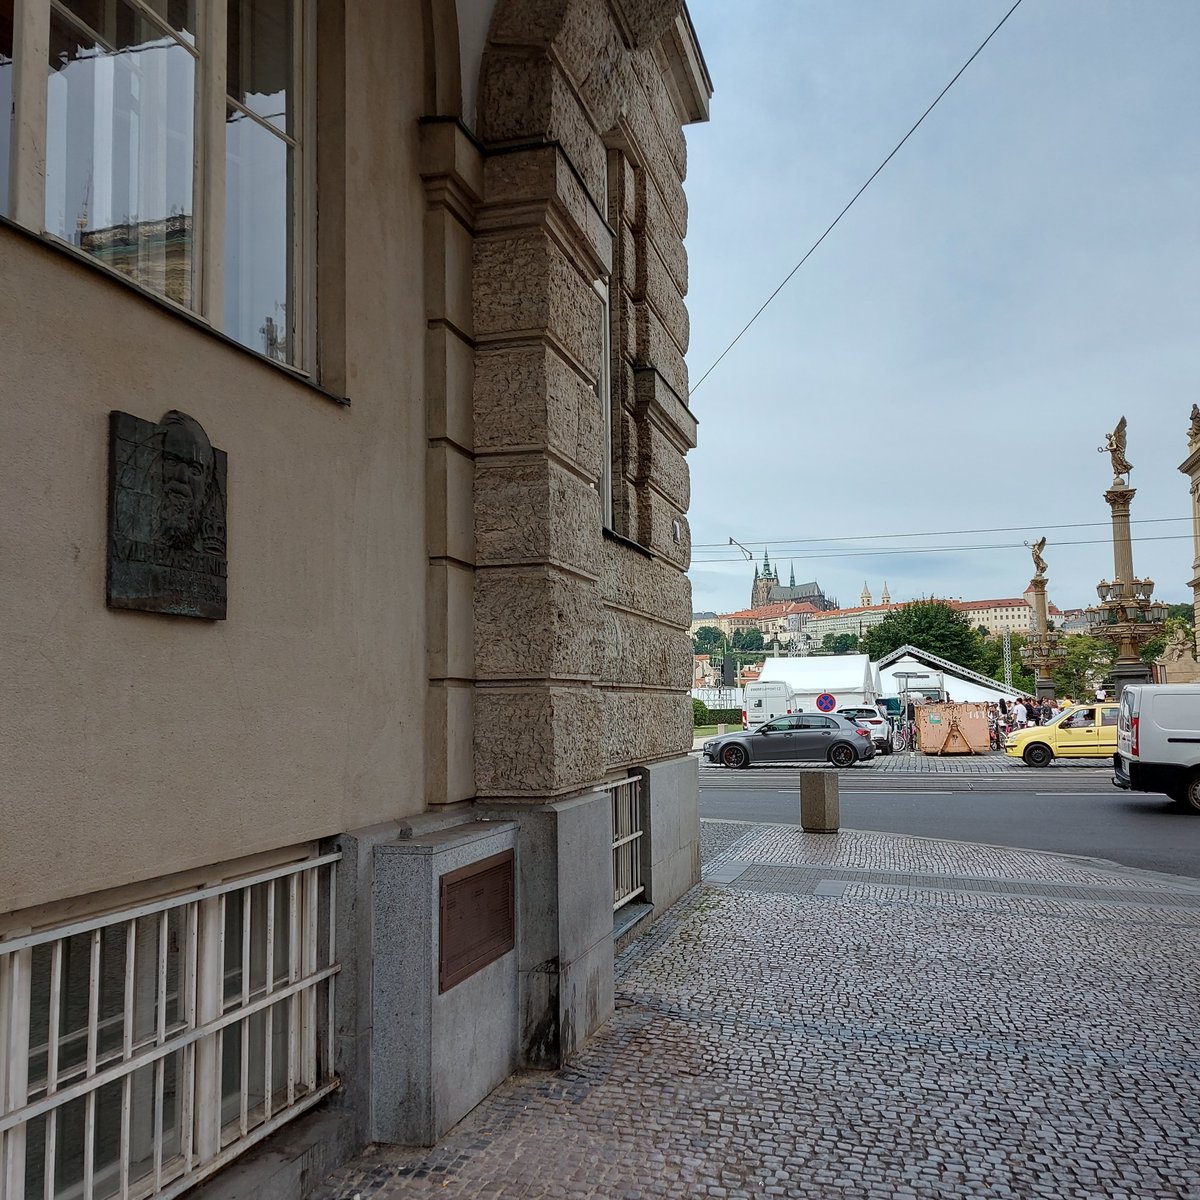 The plaque in honor of #WilhelmSteinitz with view to the #PragueCastle.
#chess #Prague
#ChessInVisualArts #memorial